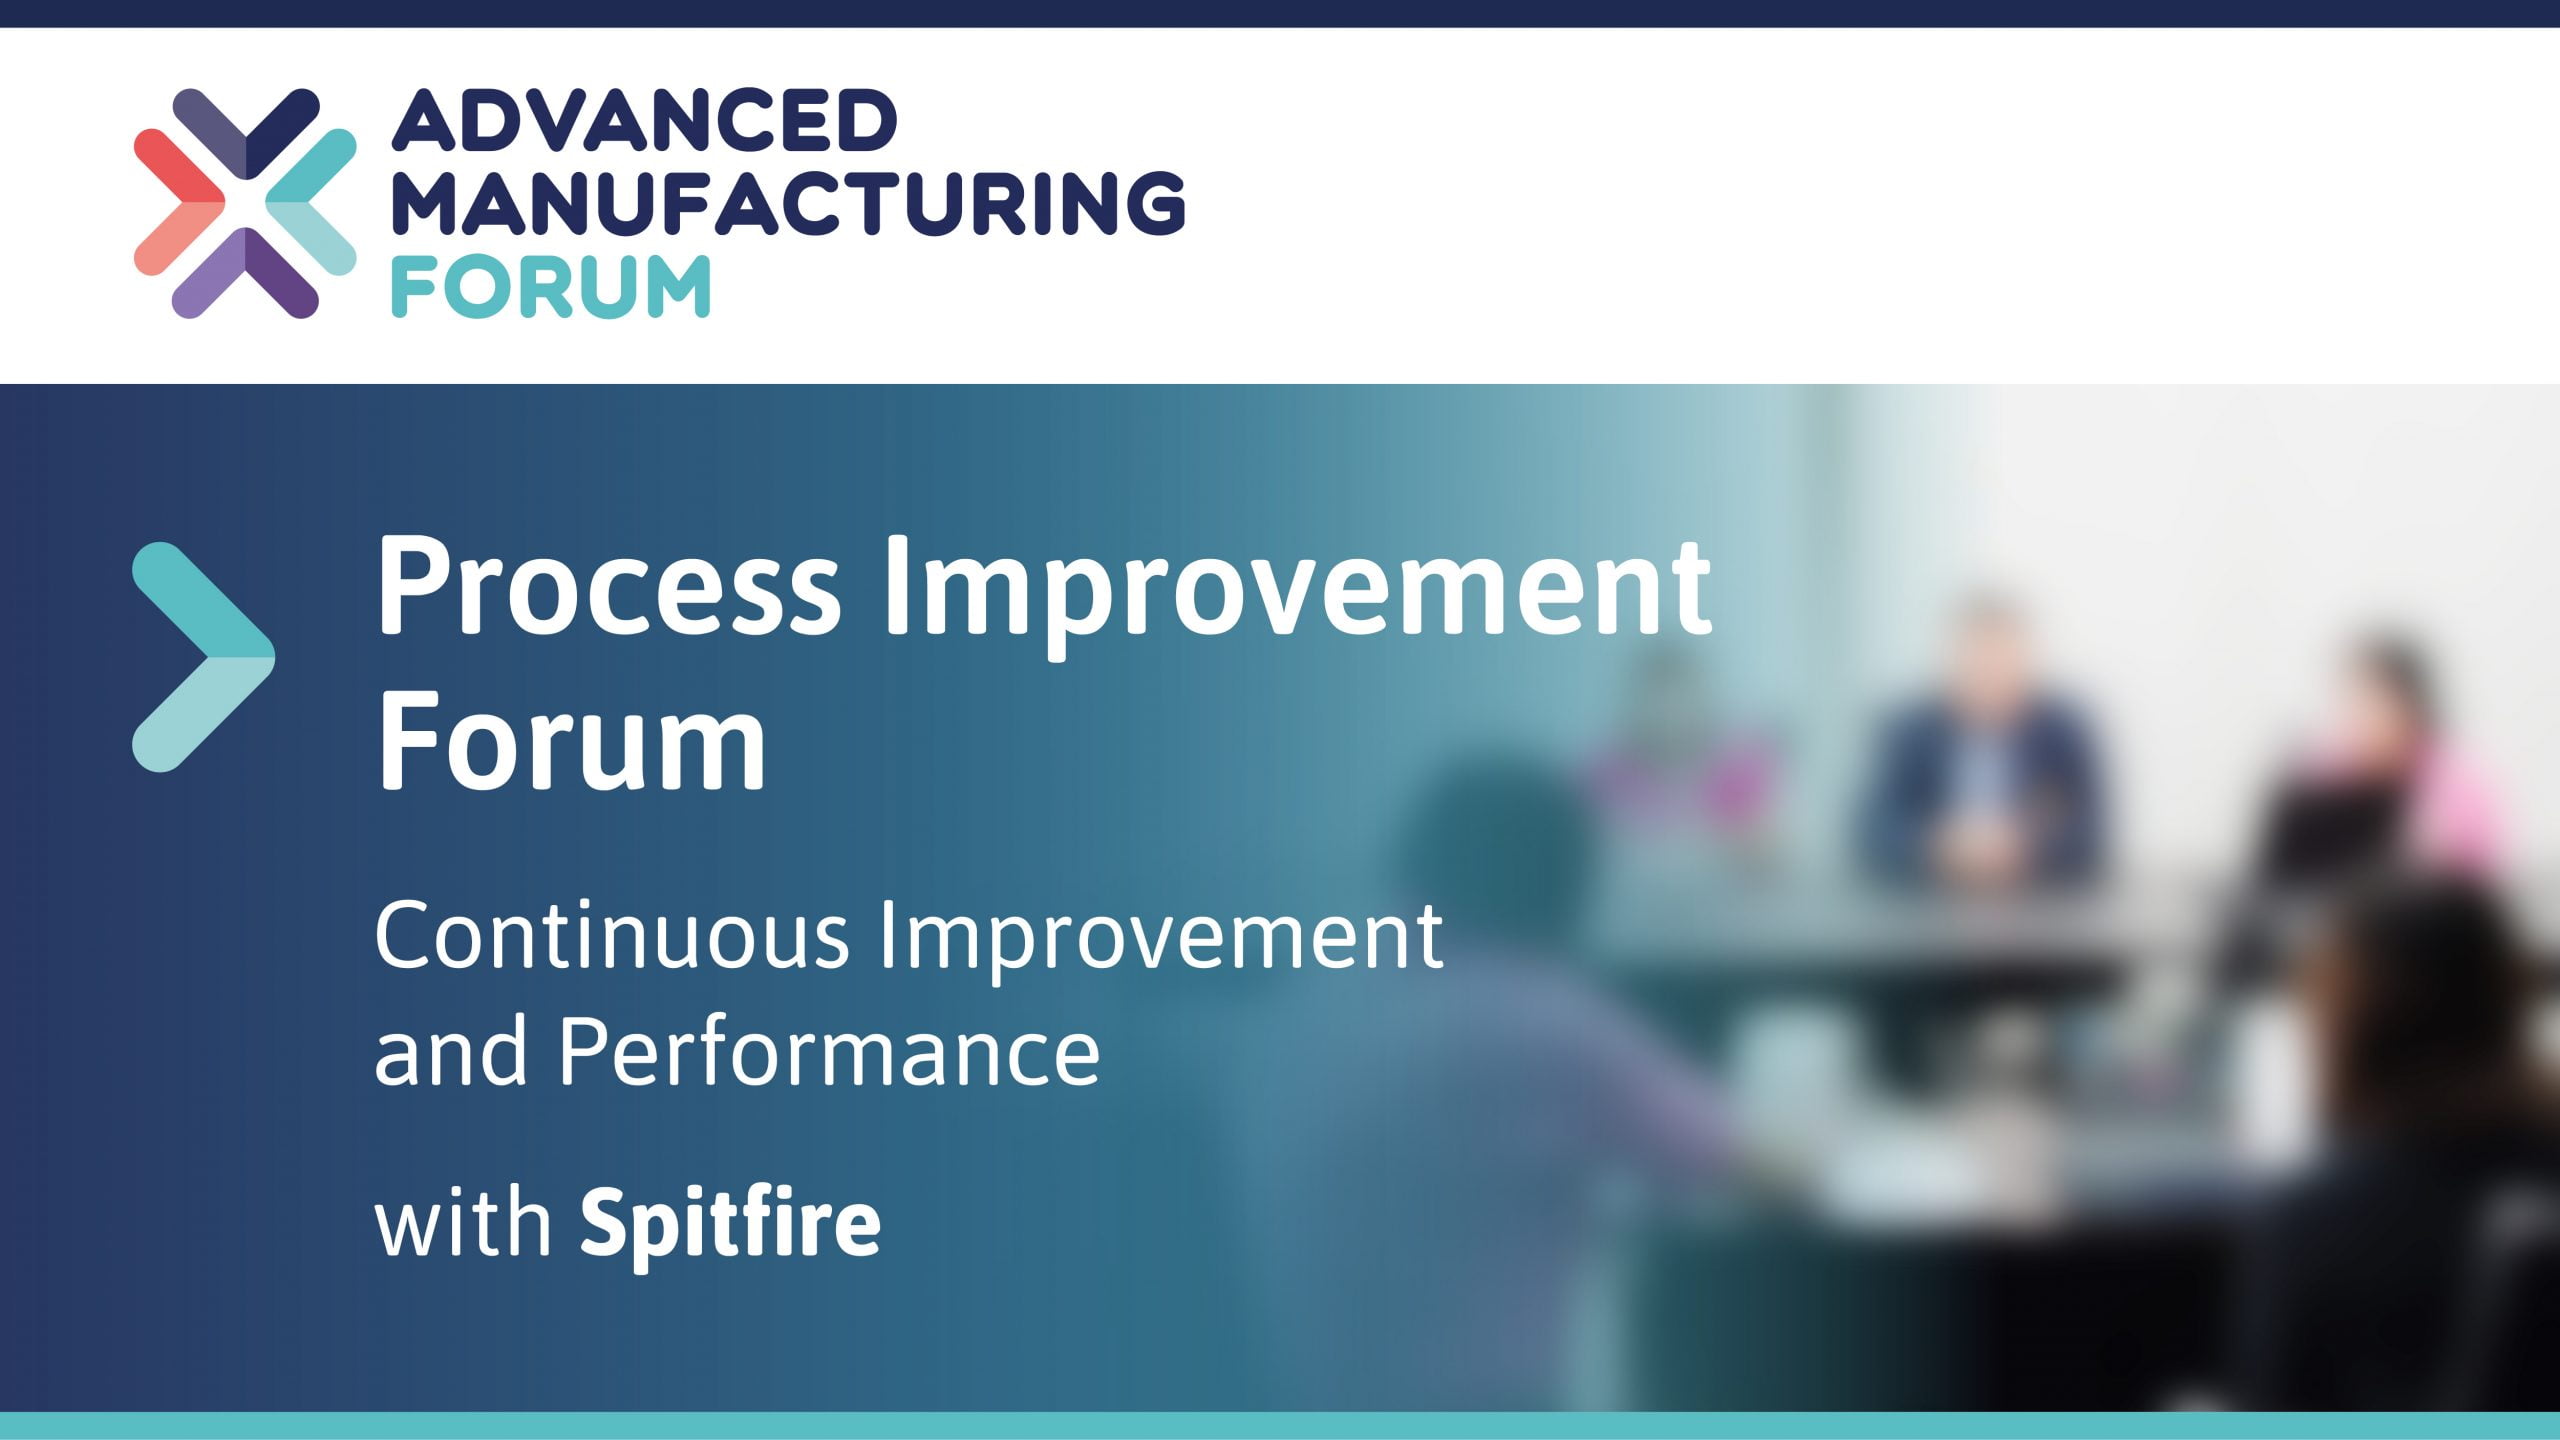 Performance and Continuous Improvement with Spitfire